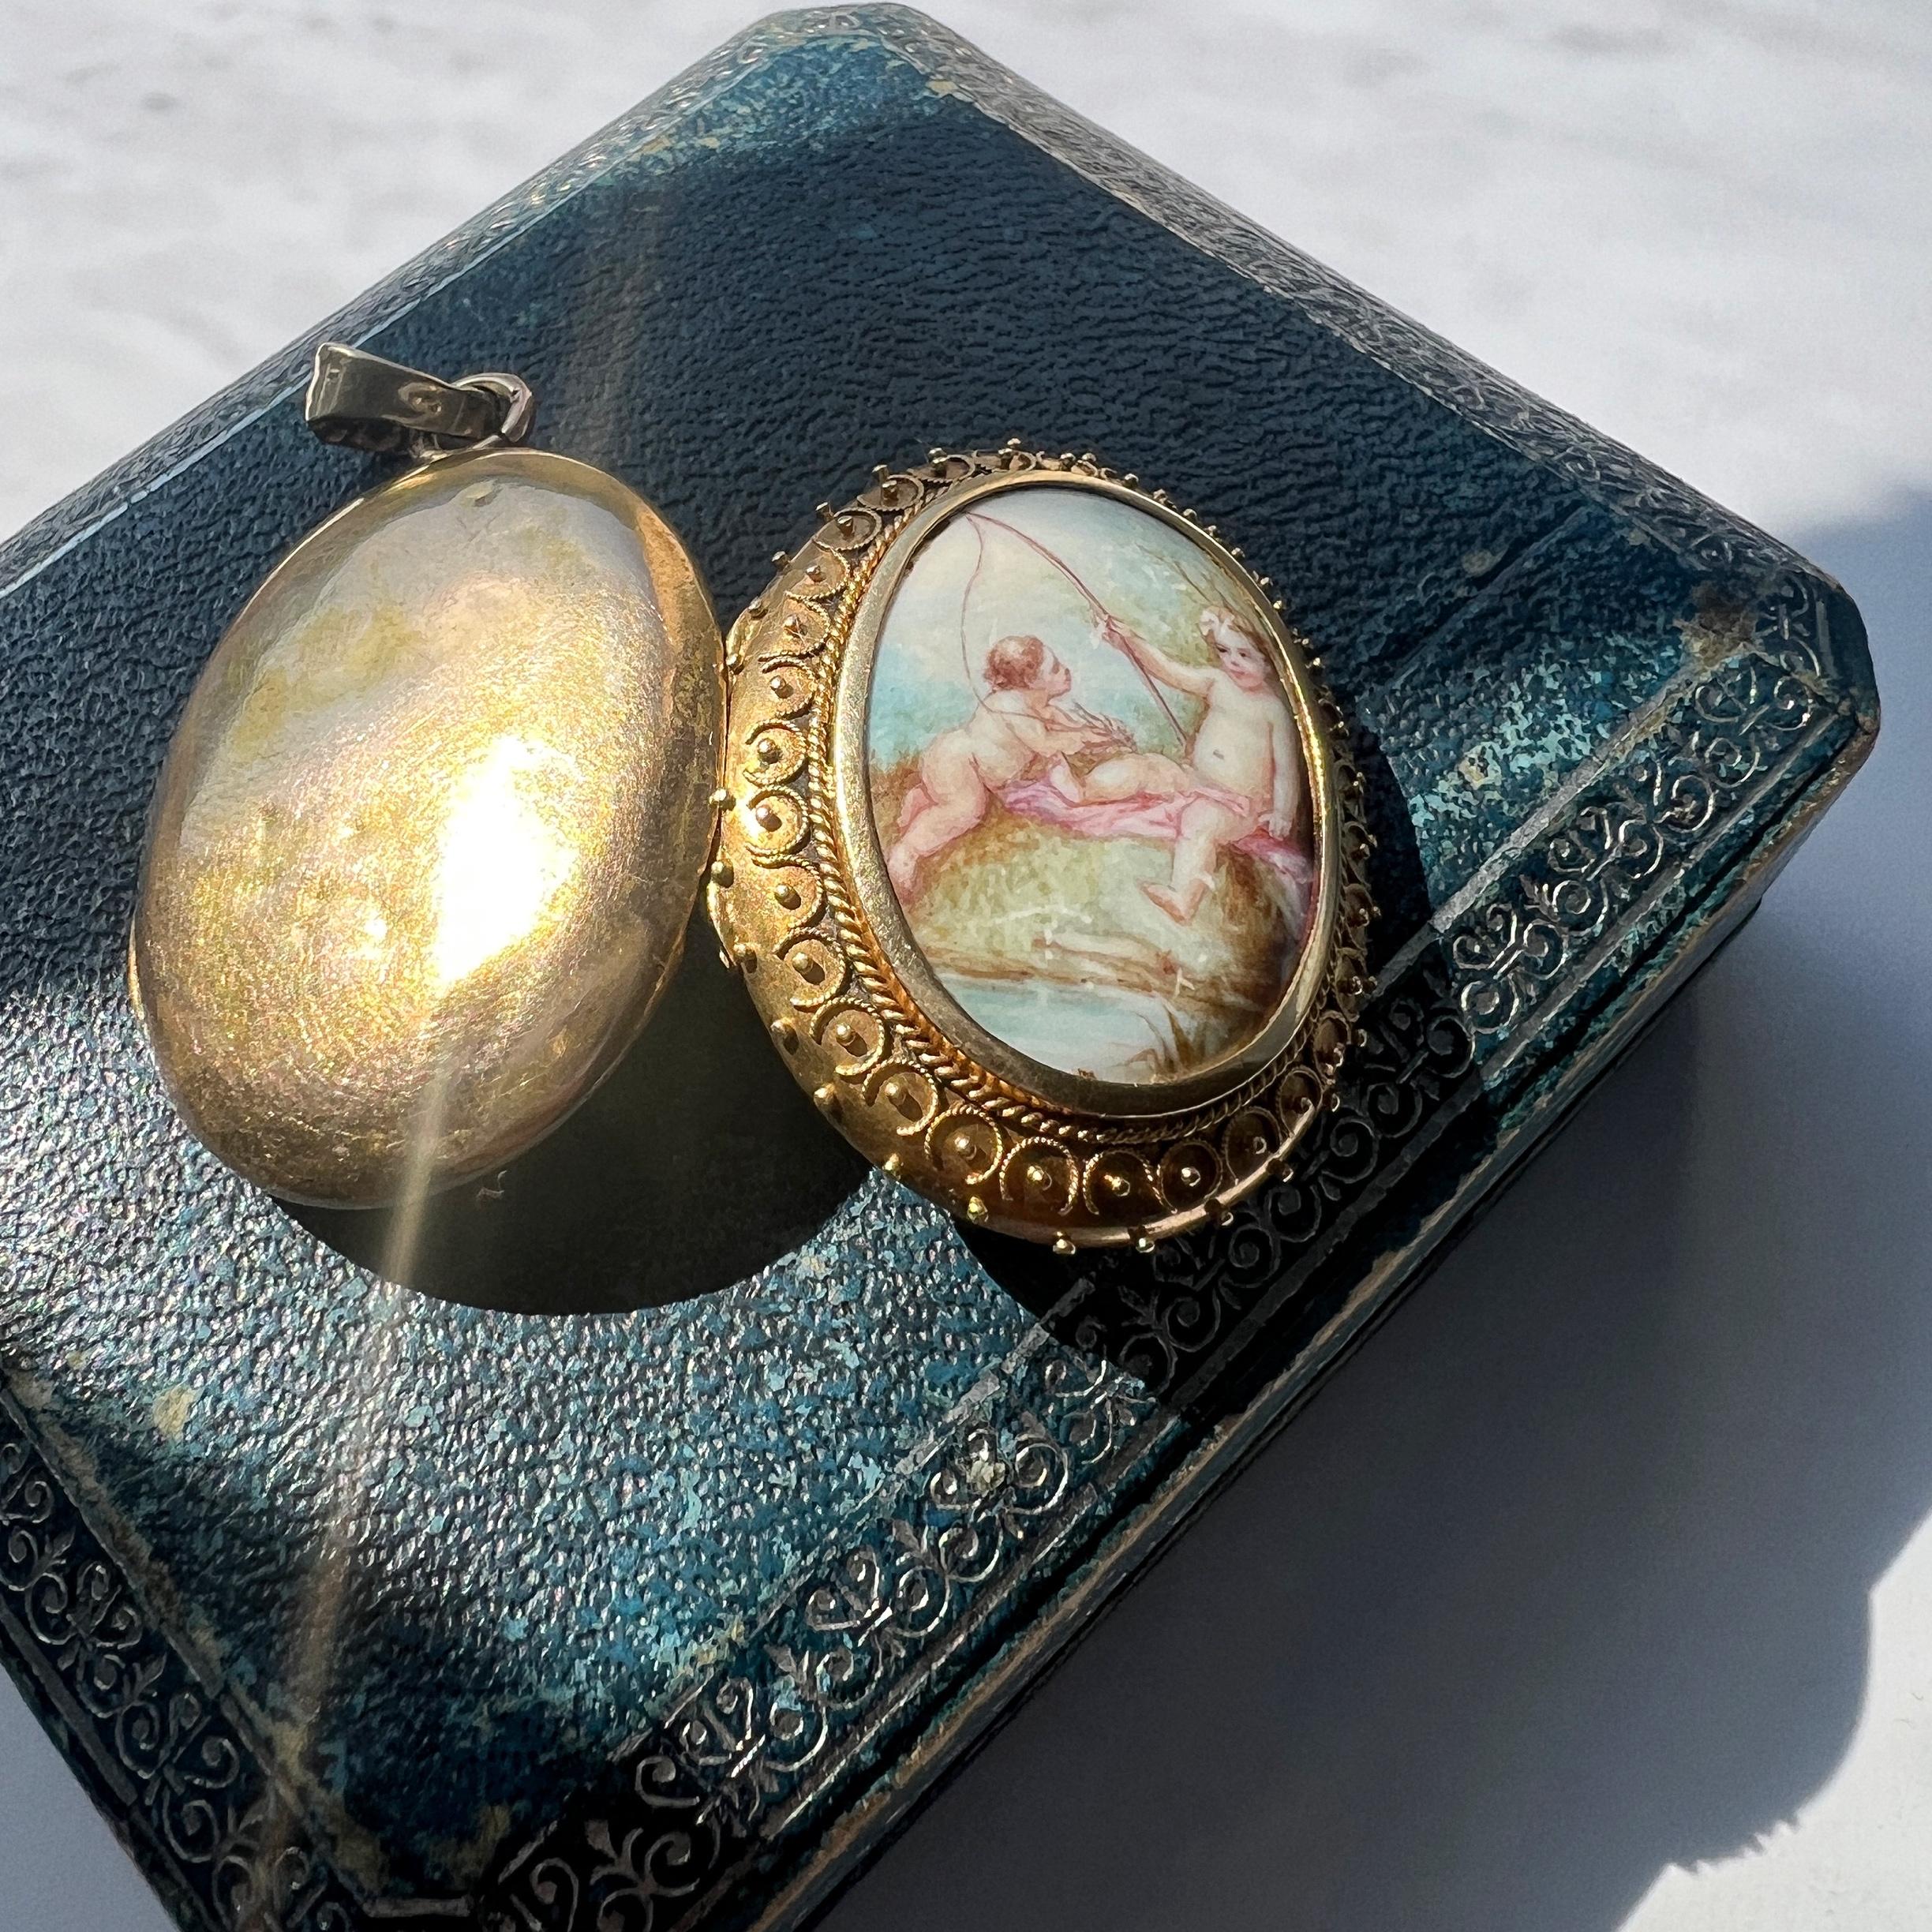 For sale a Victorian era 18K yellow gold photo locket, a treasure imbued with nostalgia and sentimental charm. This locket pendant features a captivating design centered around two enamelled cherub miniatures, gracefully engaged in a playful scene